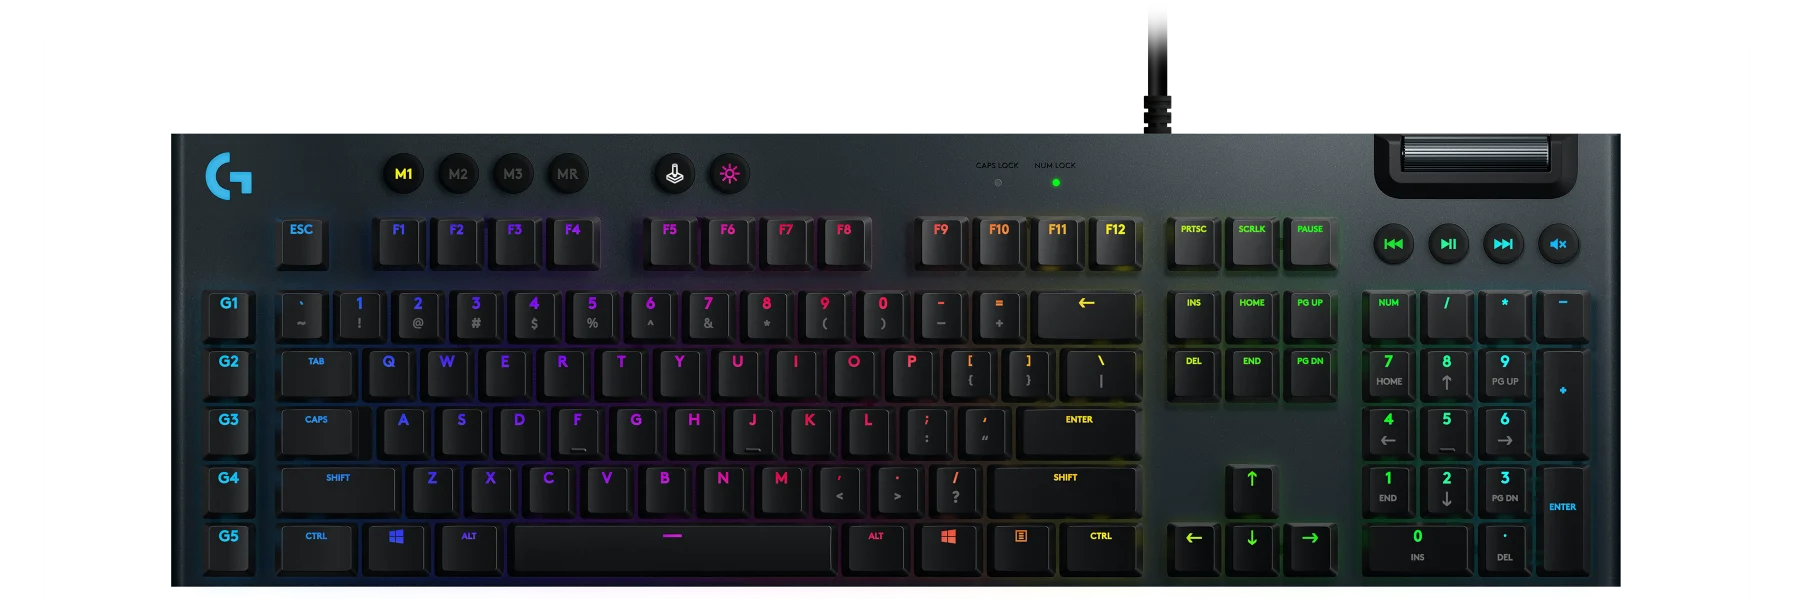 G813 front view displaying full sized keyboard with LIGHTSYNC RGB and other features such as multimedia controls, programmable keys & etc